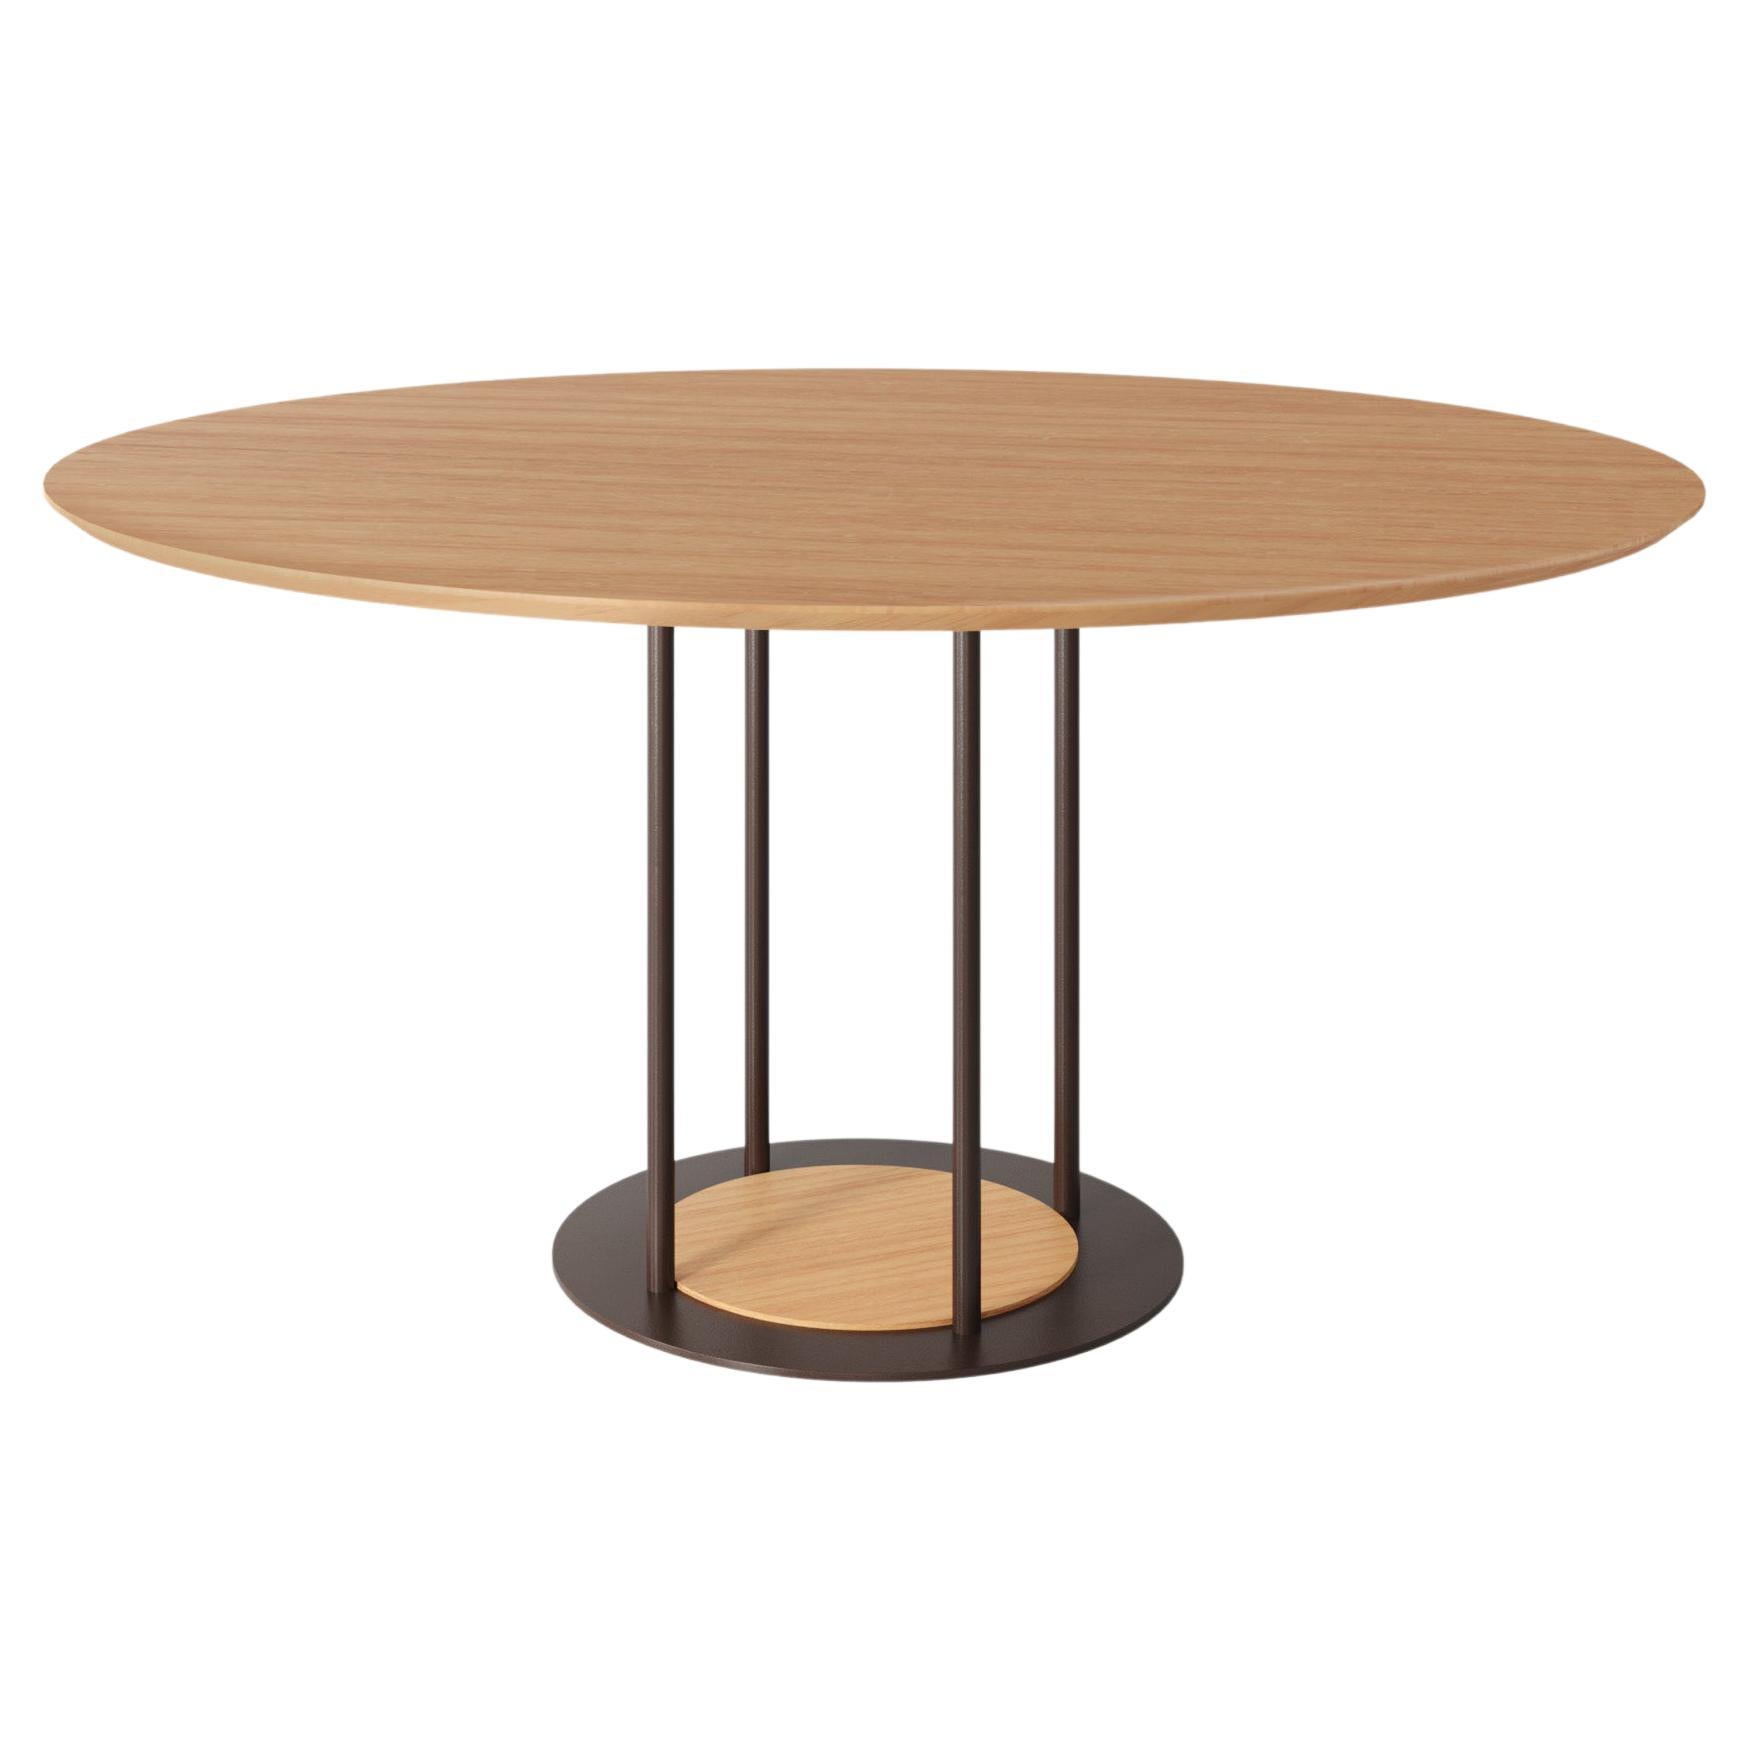 "Pilar" Modernist Round Dining Table painted Steel and Natural Wood For Sale